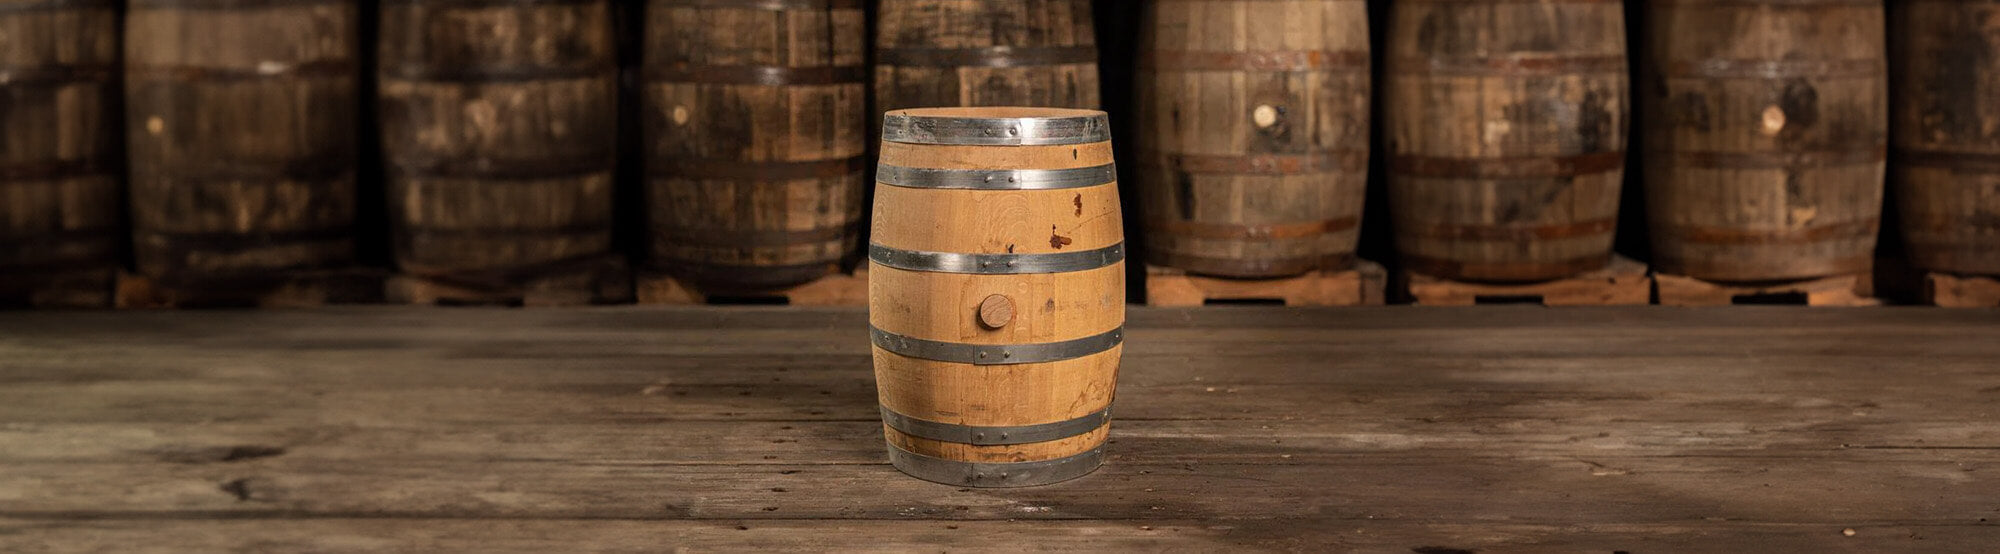 freshly emptied 15 gallon barrel with full-size barrels behind it on pallets